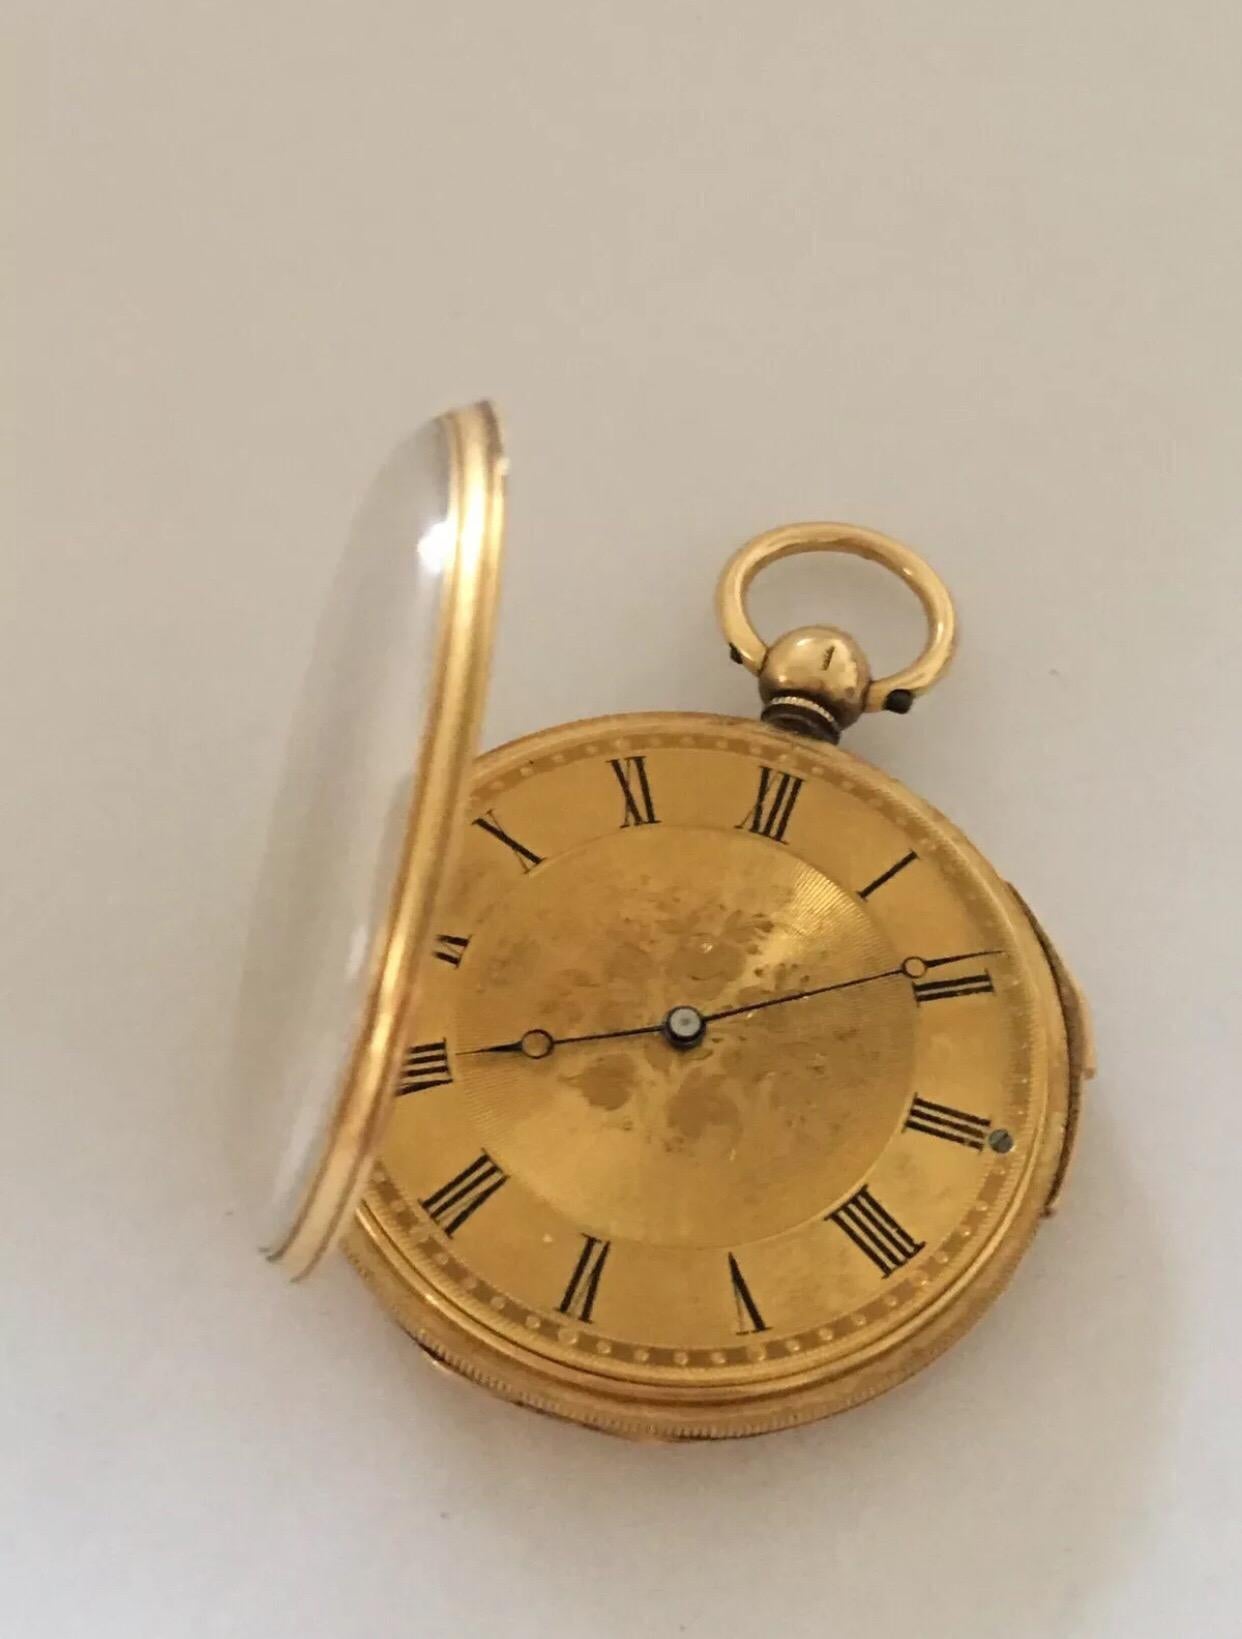 Fine Antique 18 Karat Gold Quarter Repeater Small Pocket Watch Signed Rotherhams 2